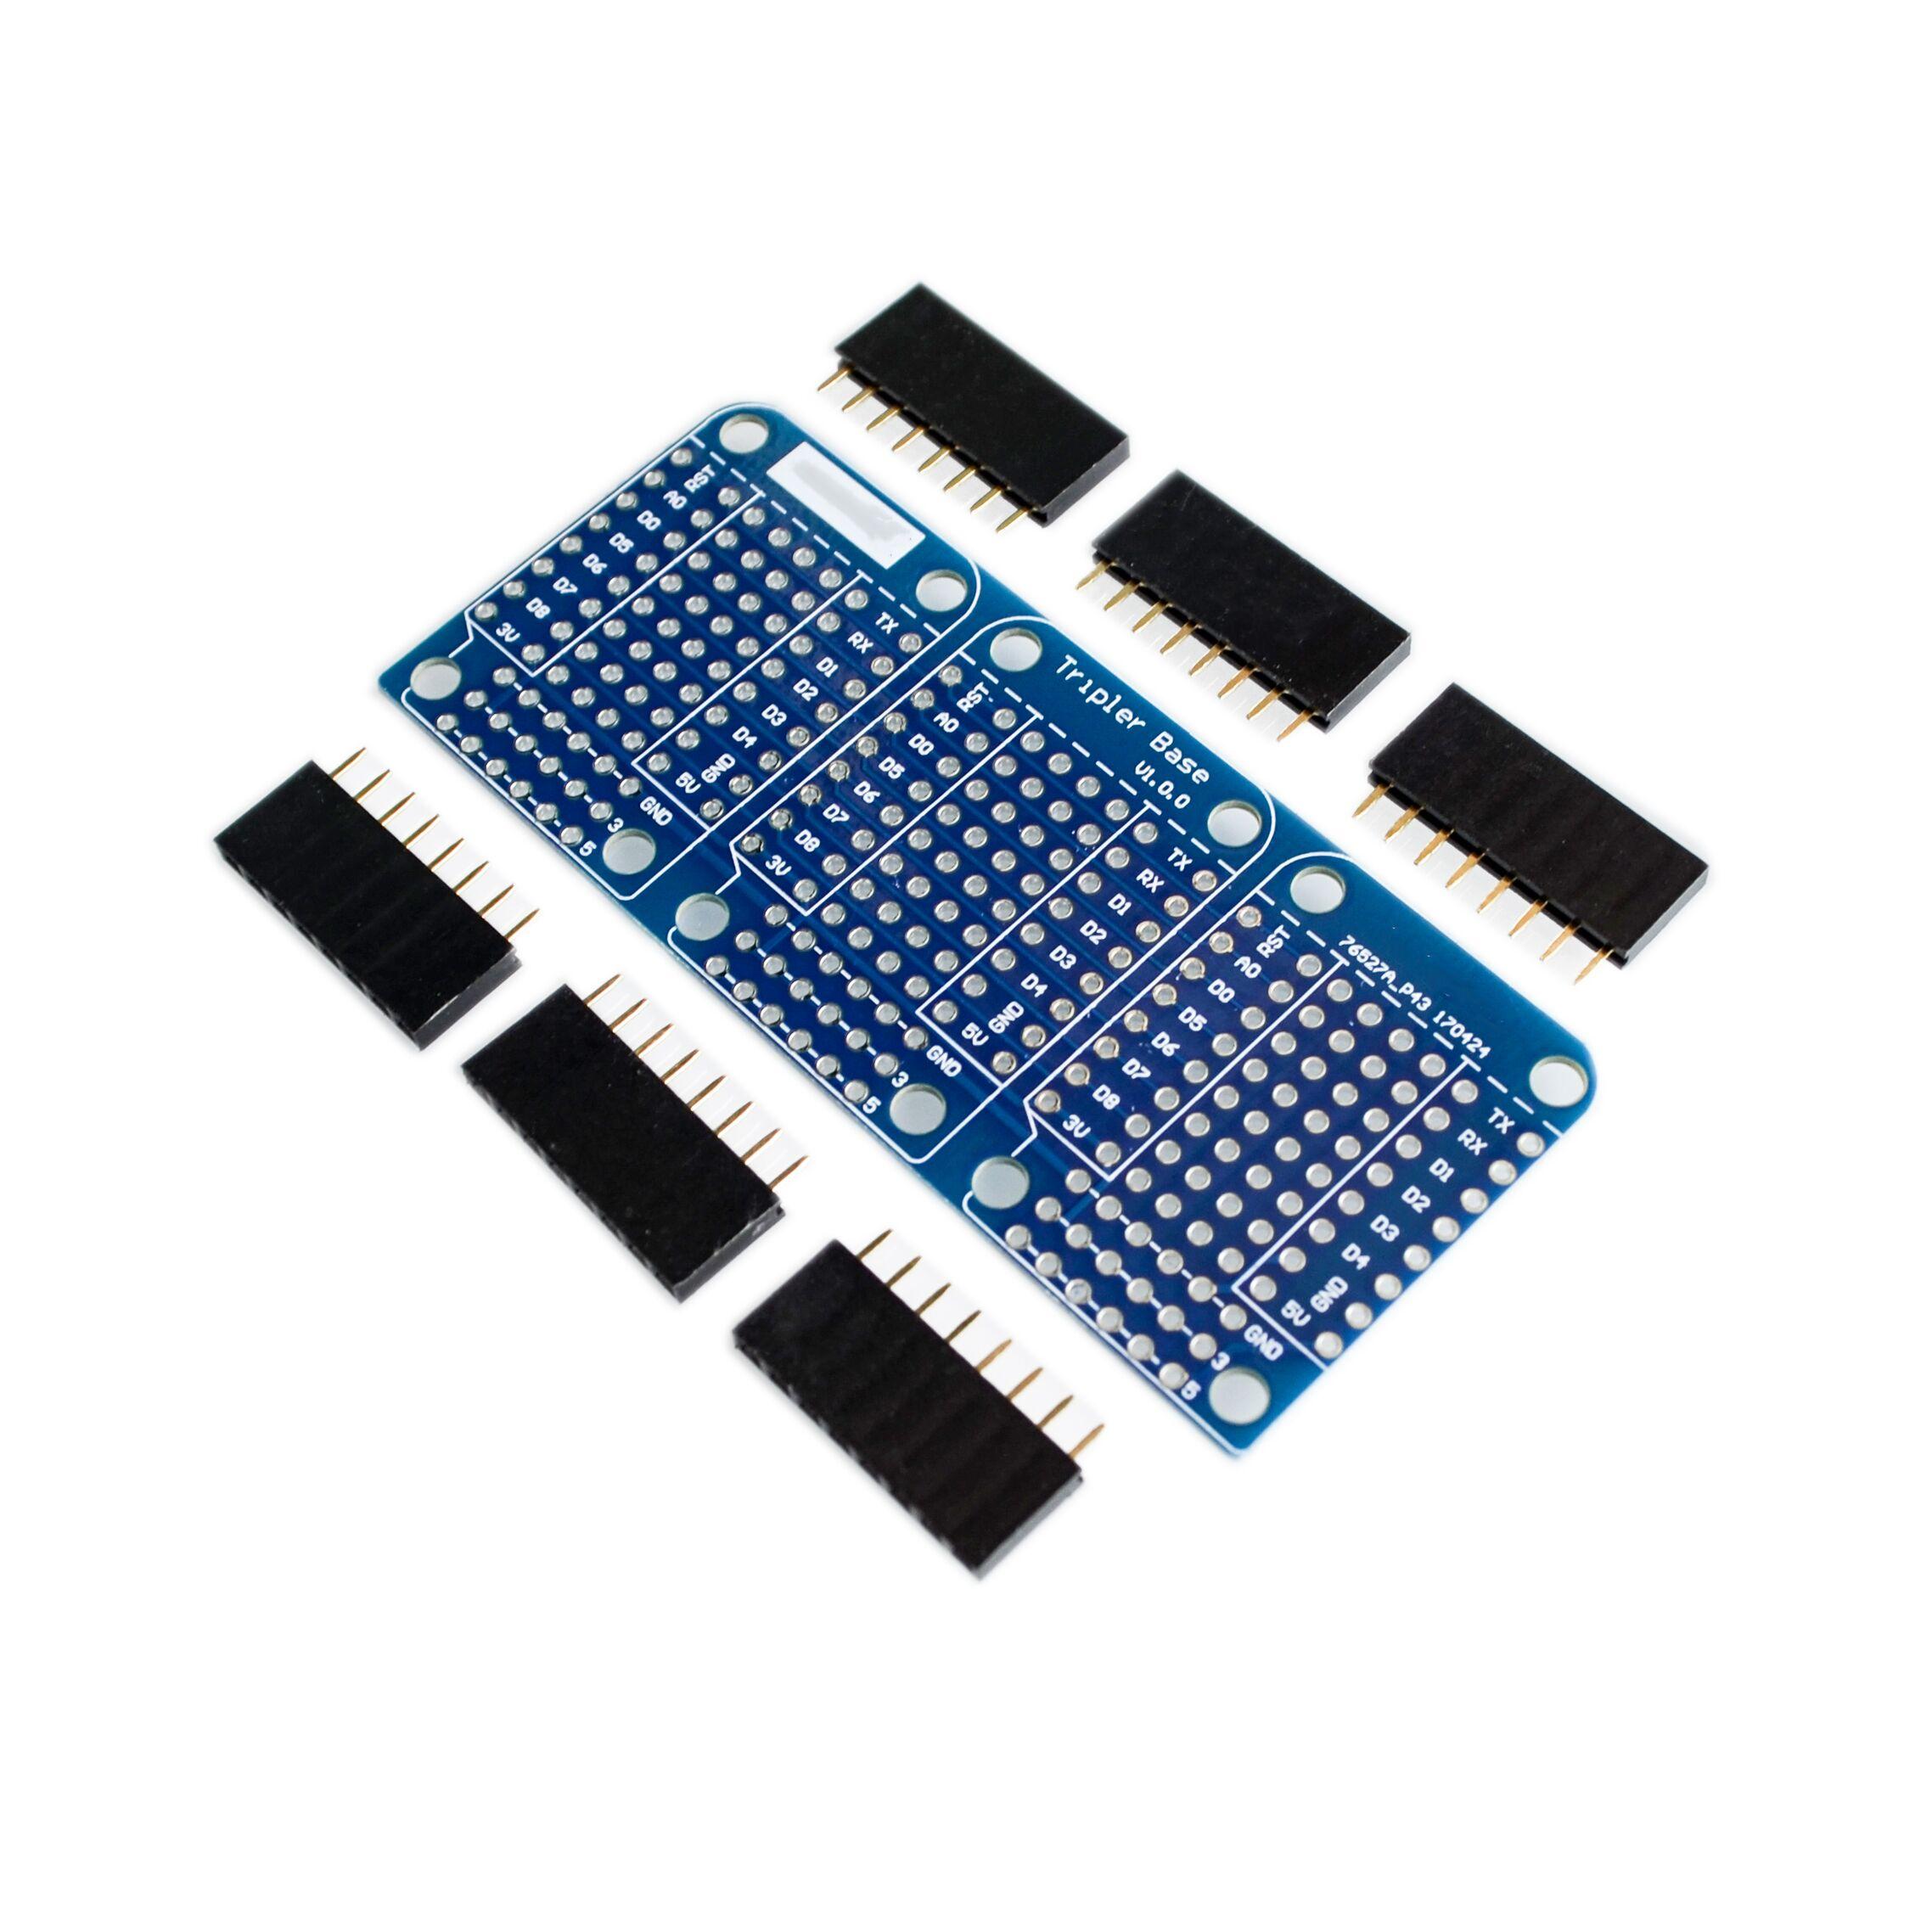 10PCS/LOT Triple Shield For WeMos D1 Mini Dua Sided Perf Board For Arduino Compatible